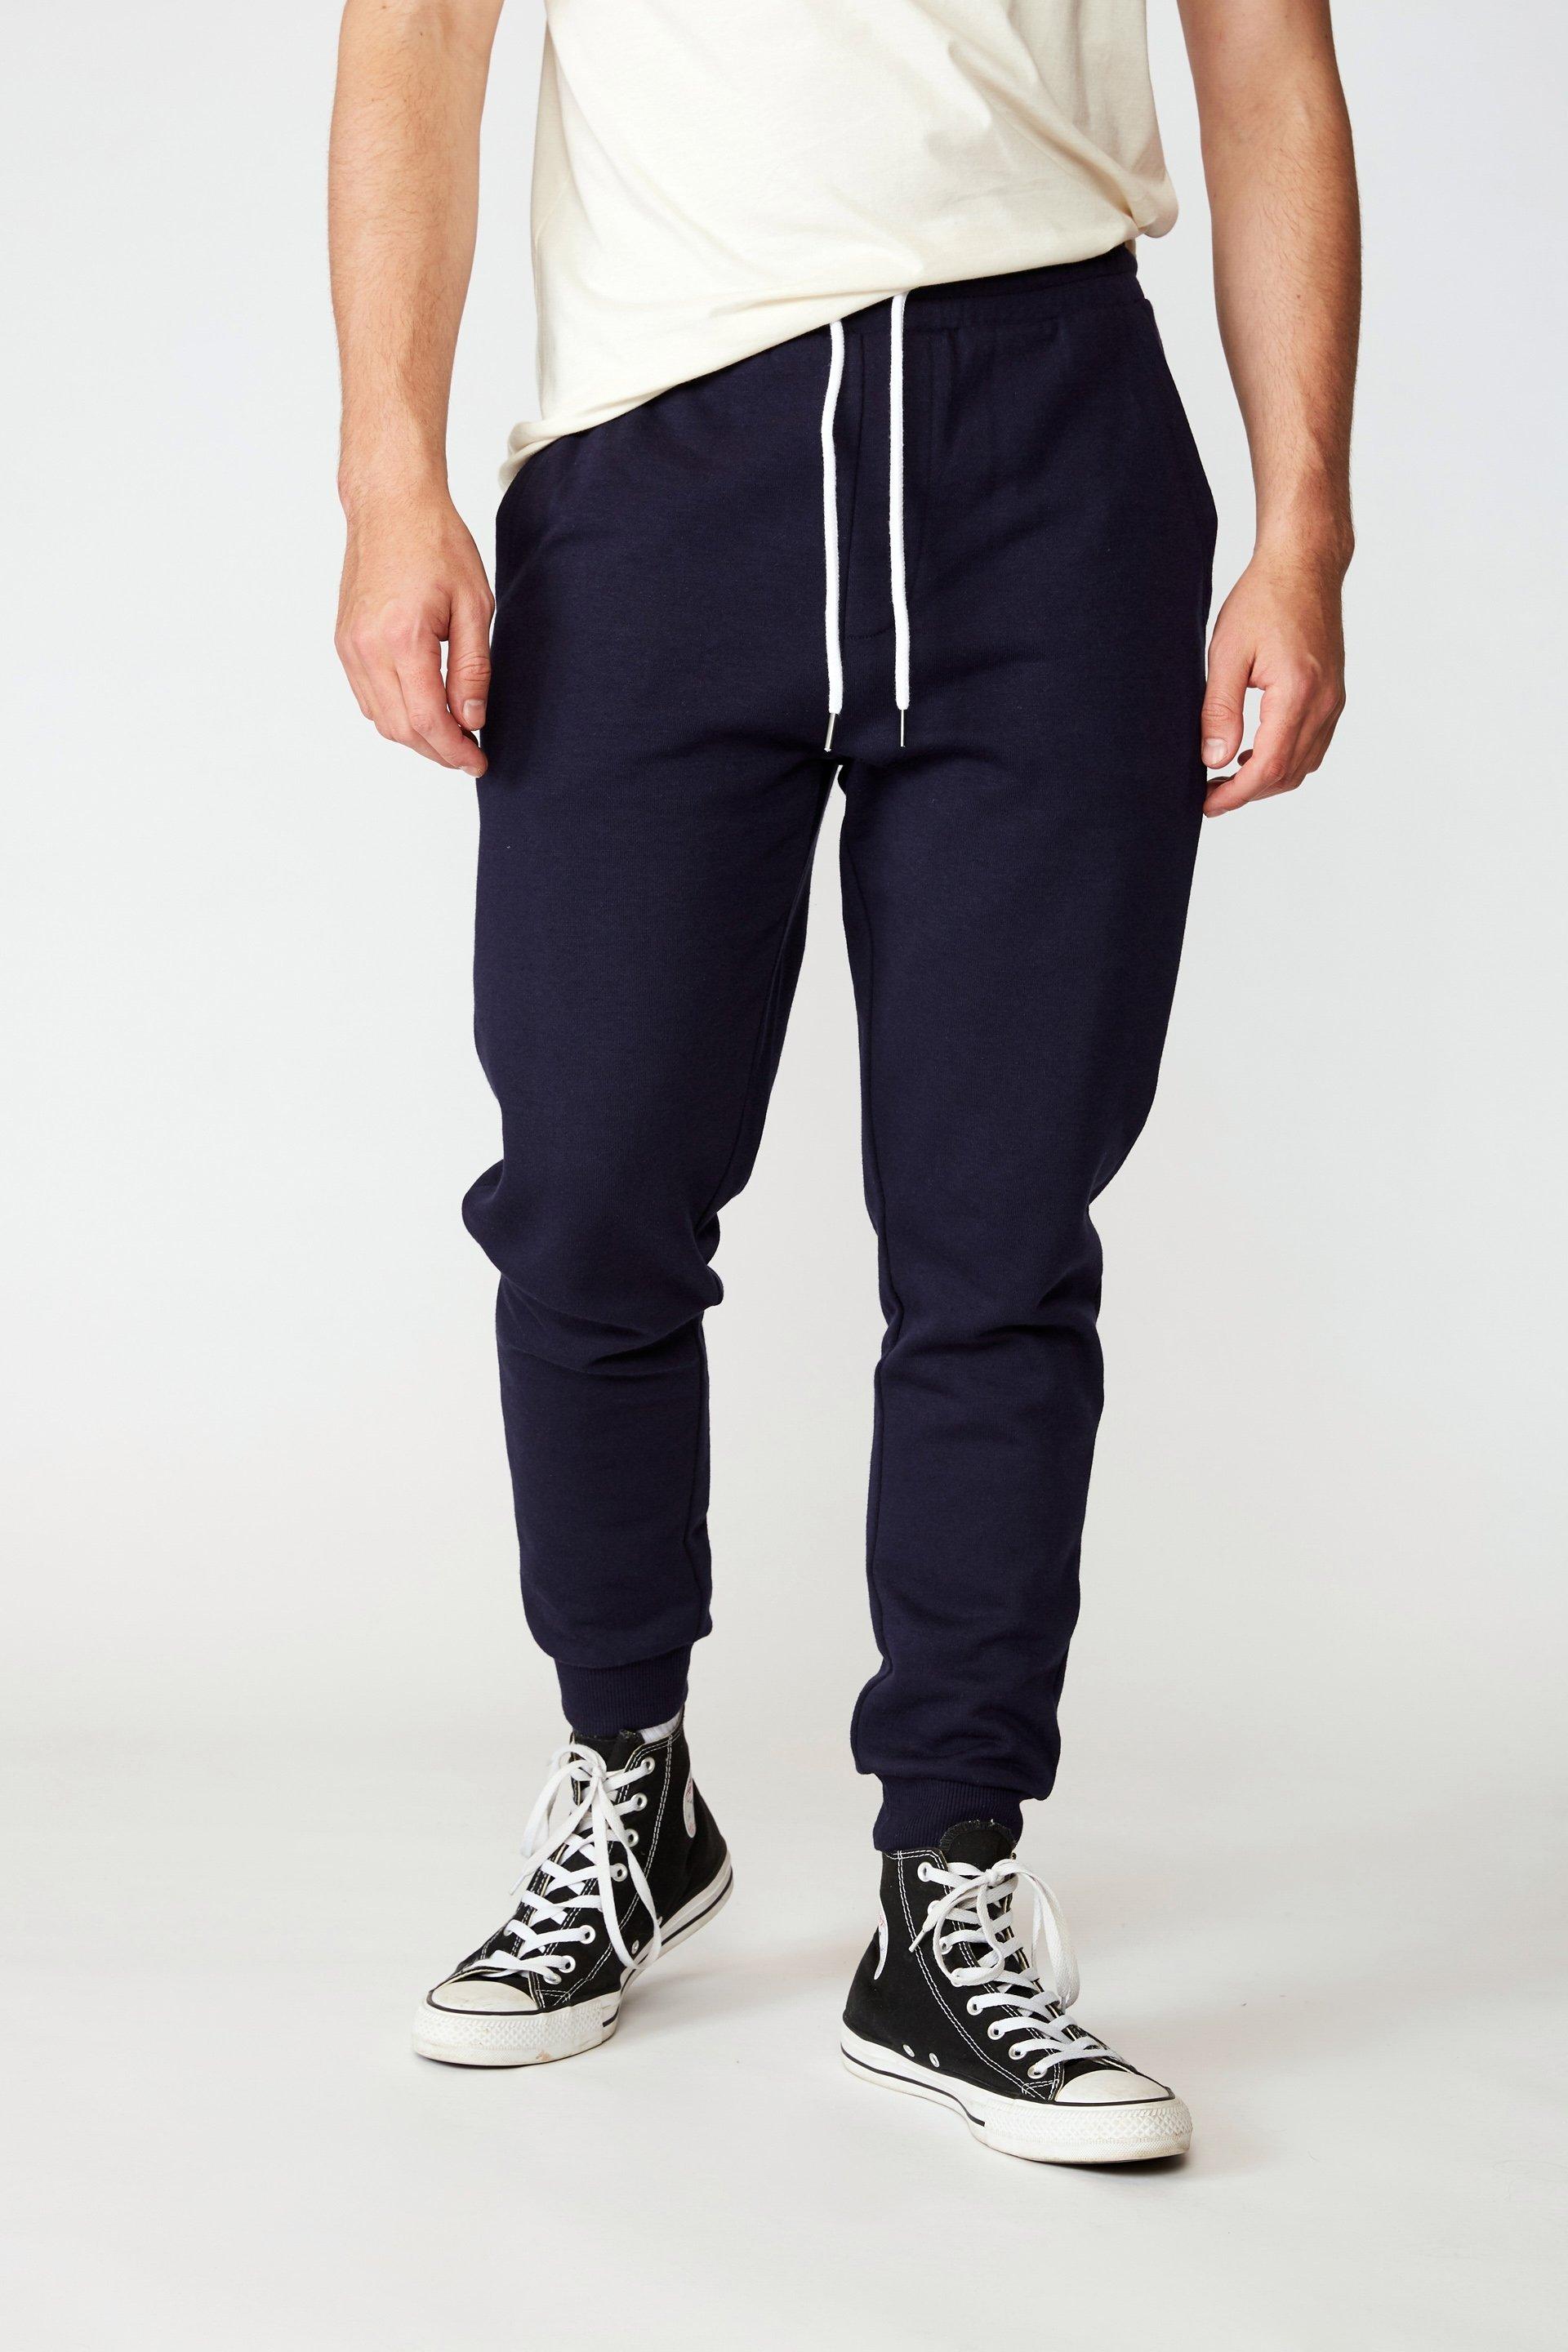 Basic track pant - navy Factorie Pants & Chinos | Superbalist.com